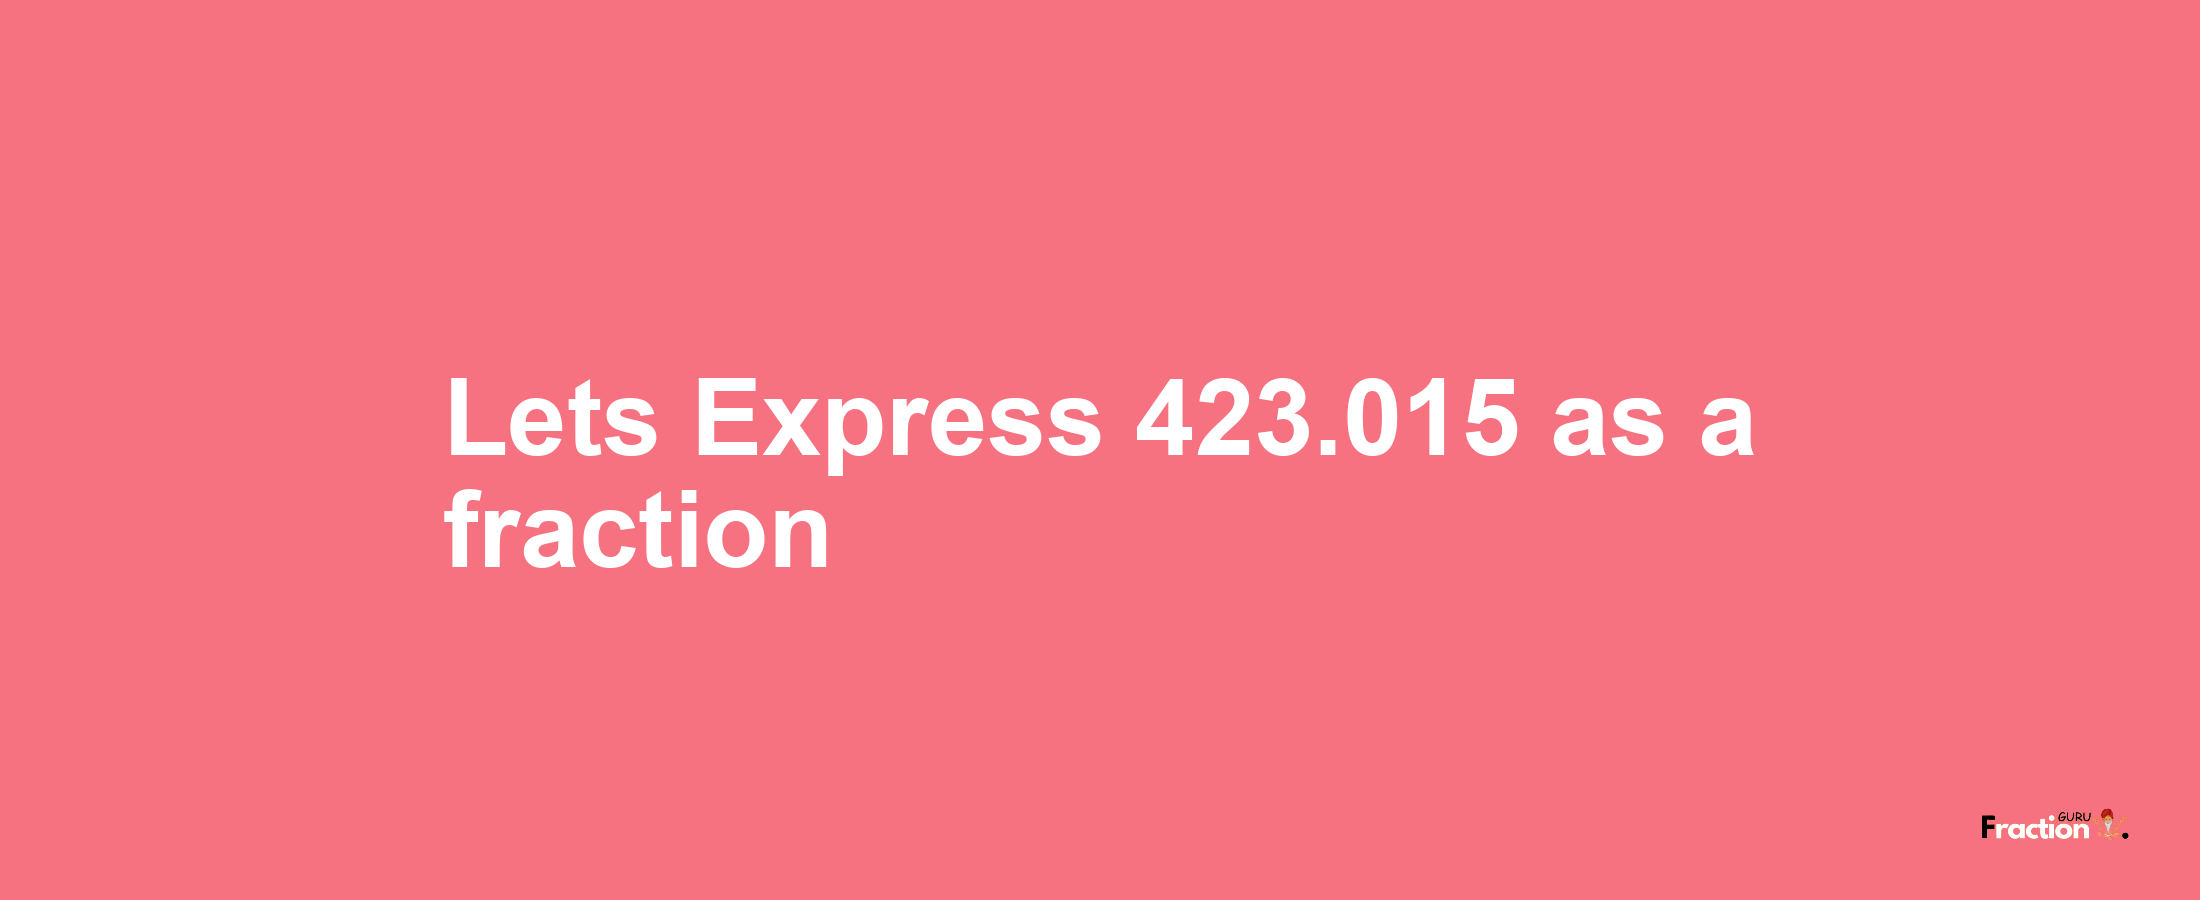 Lets Express 423.015 as afraction